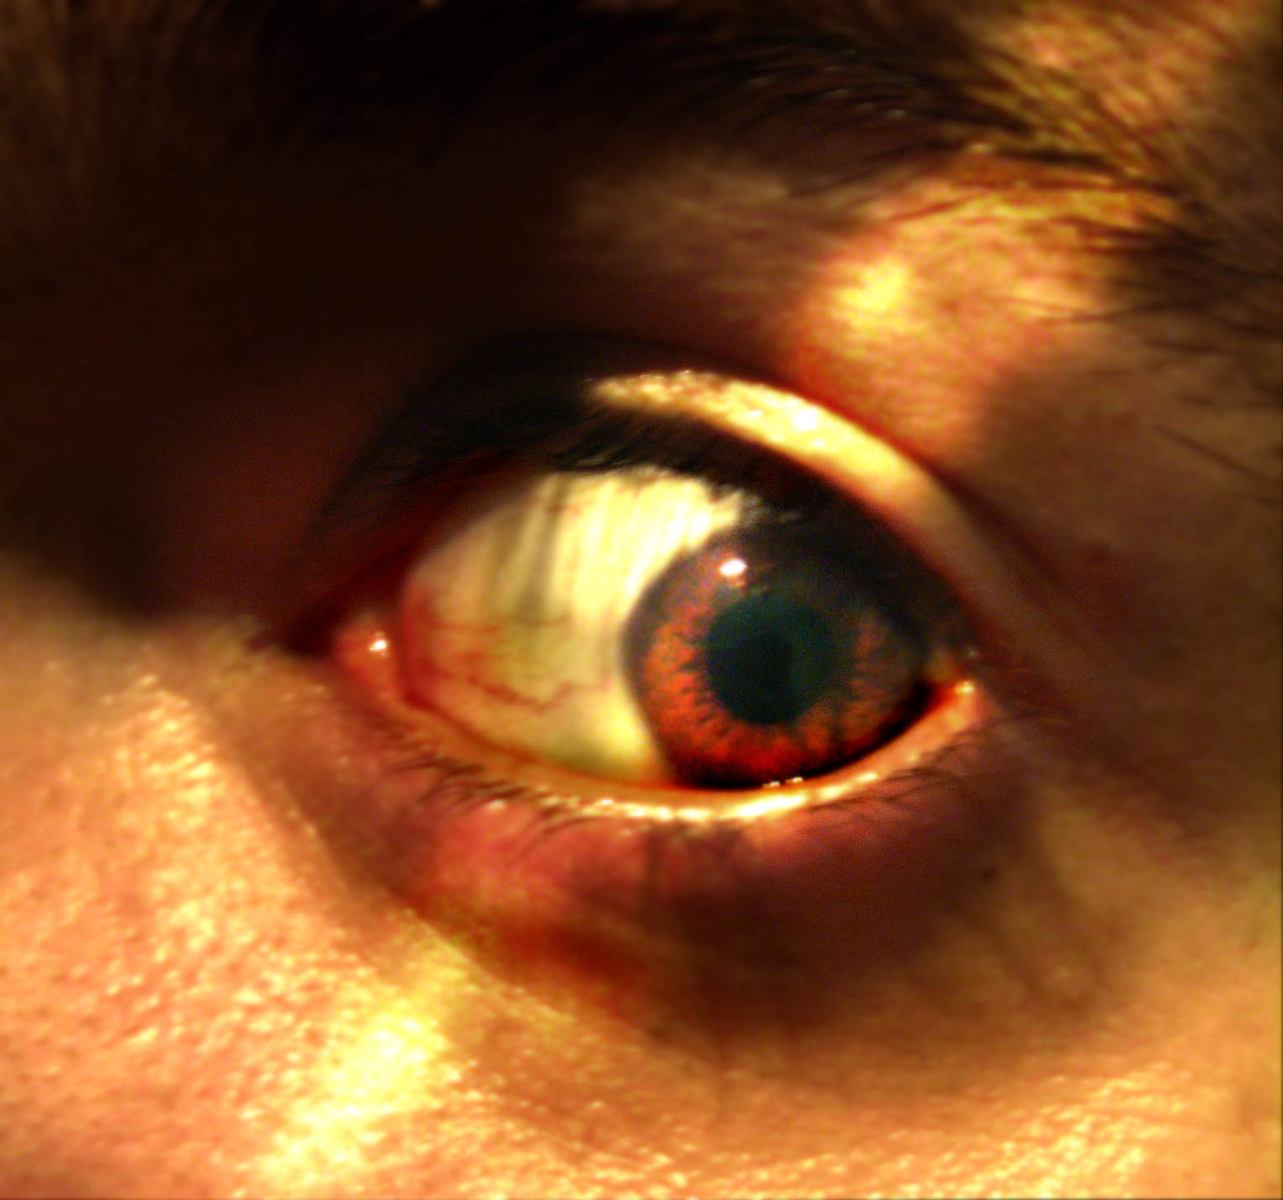 an image of an eye with red and black circles